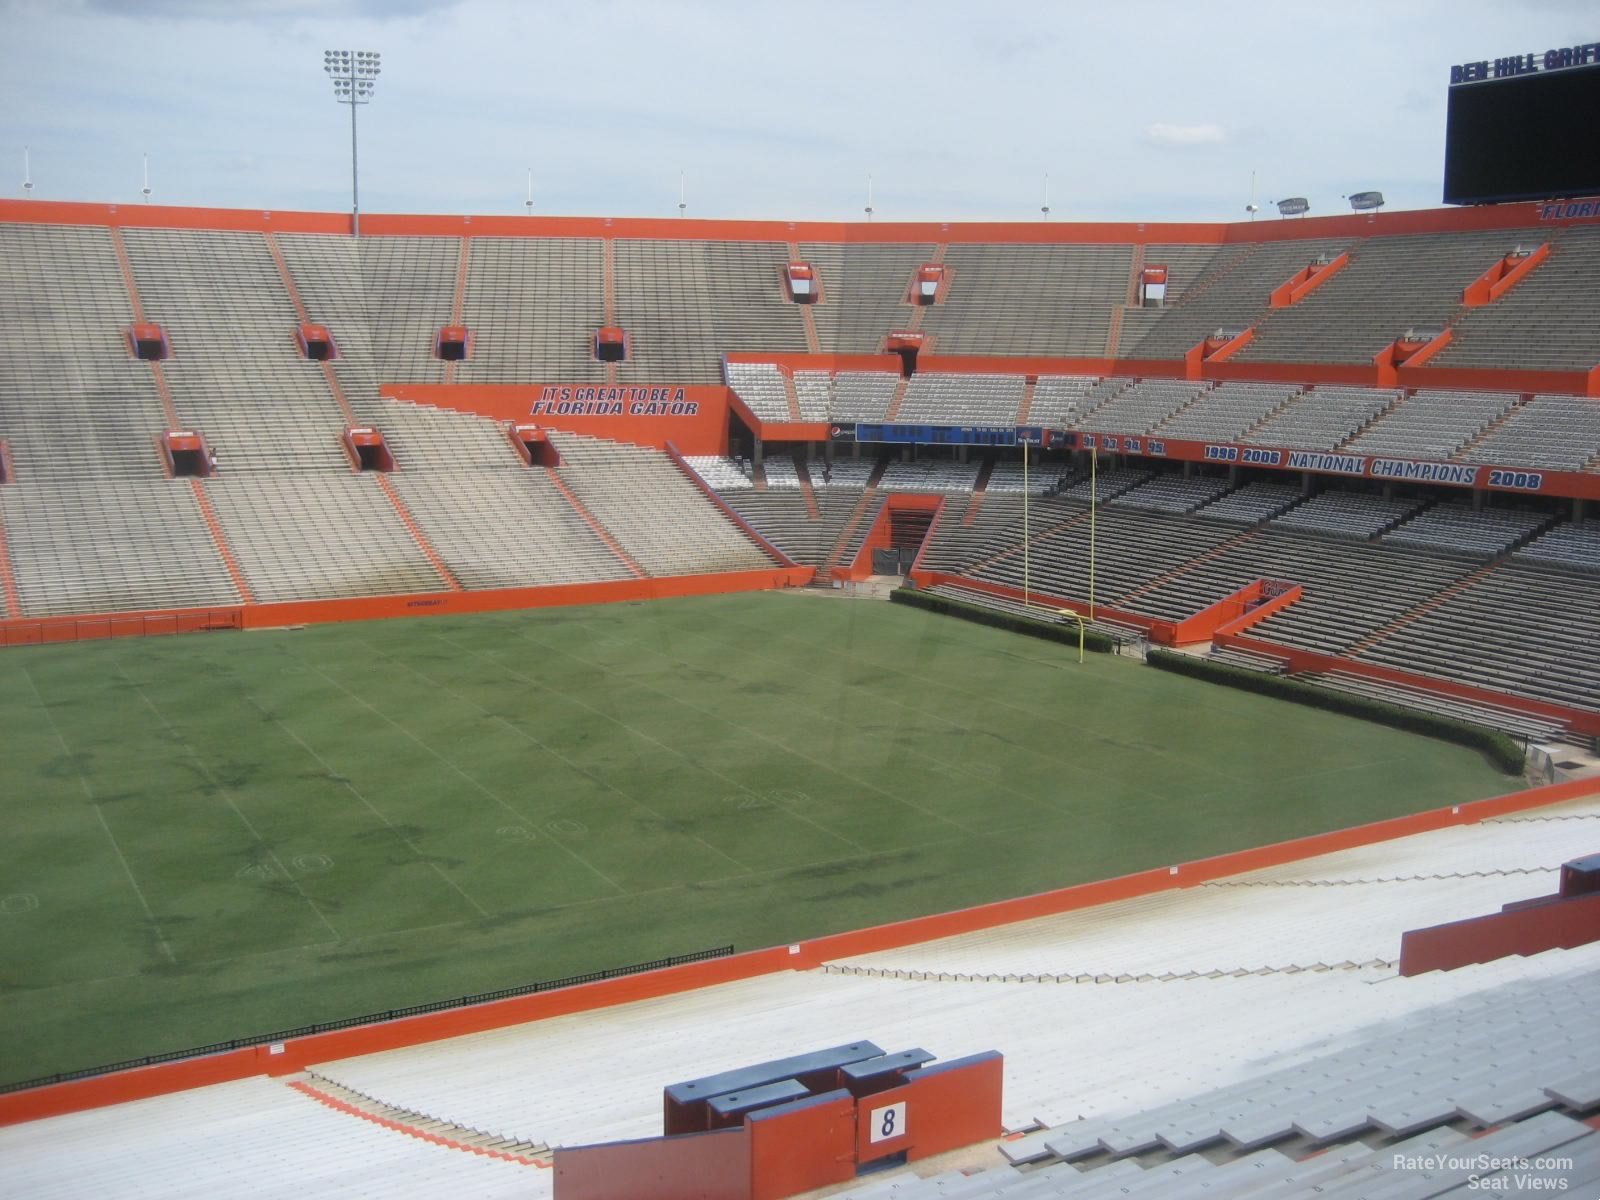 section 9, row 58 seat view  - ben hill griffin stadium